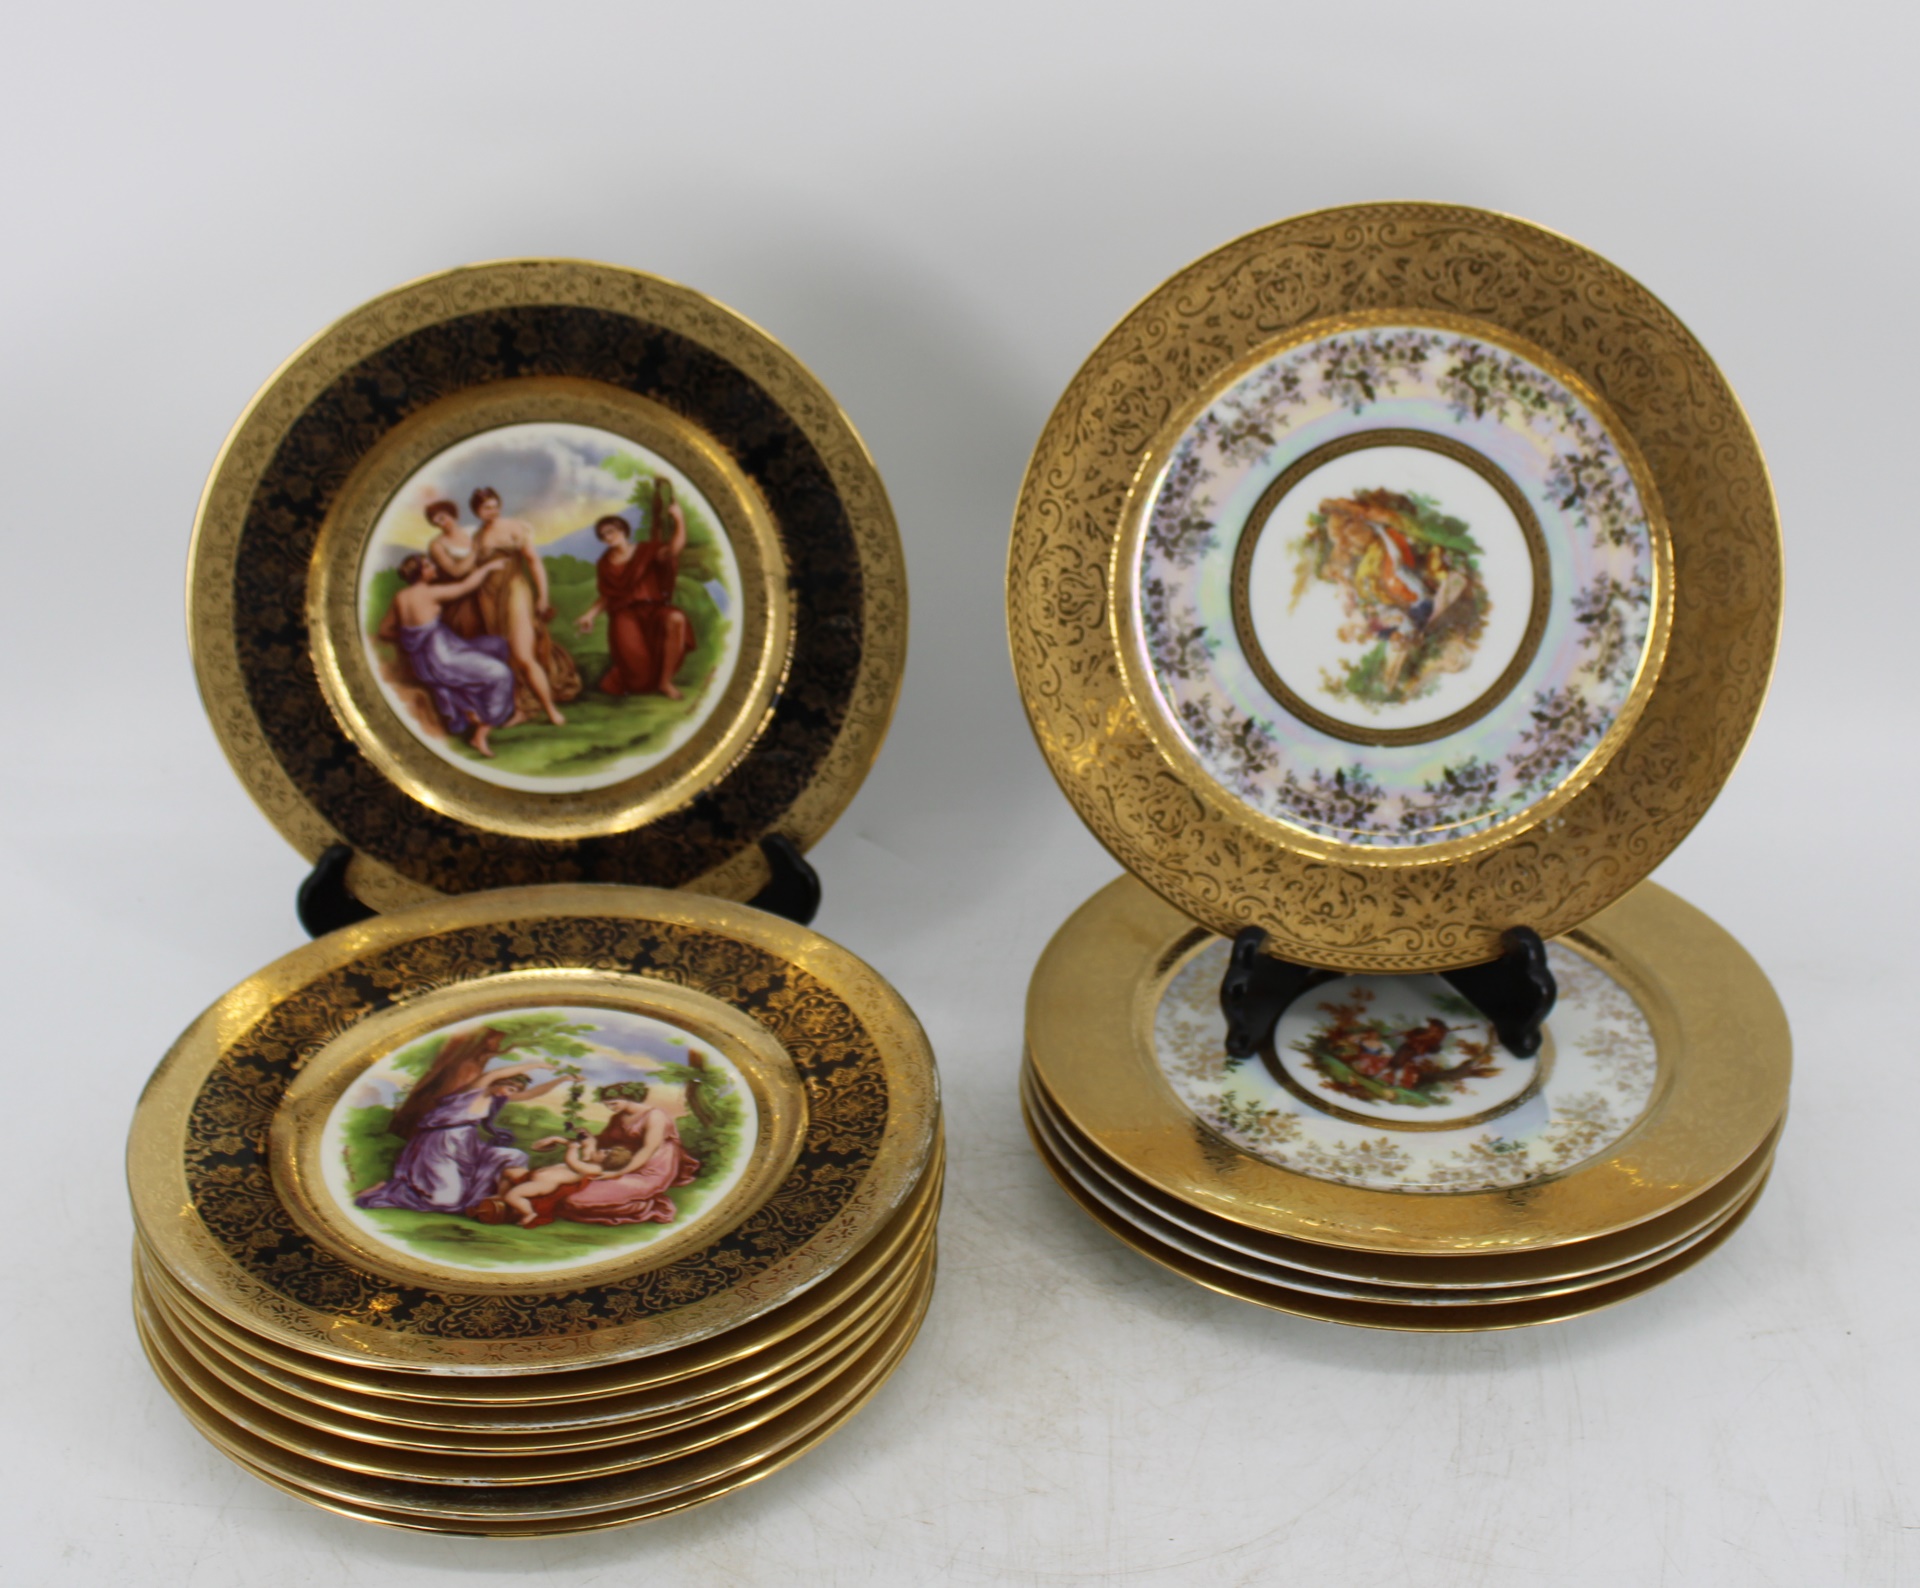 LIMOGES AND ROYAL CHINA GILT DECORATED